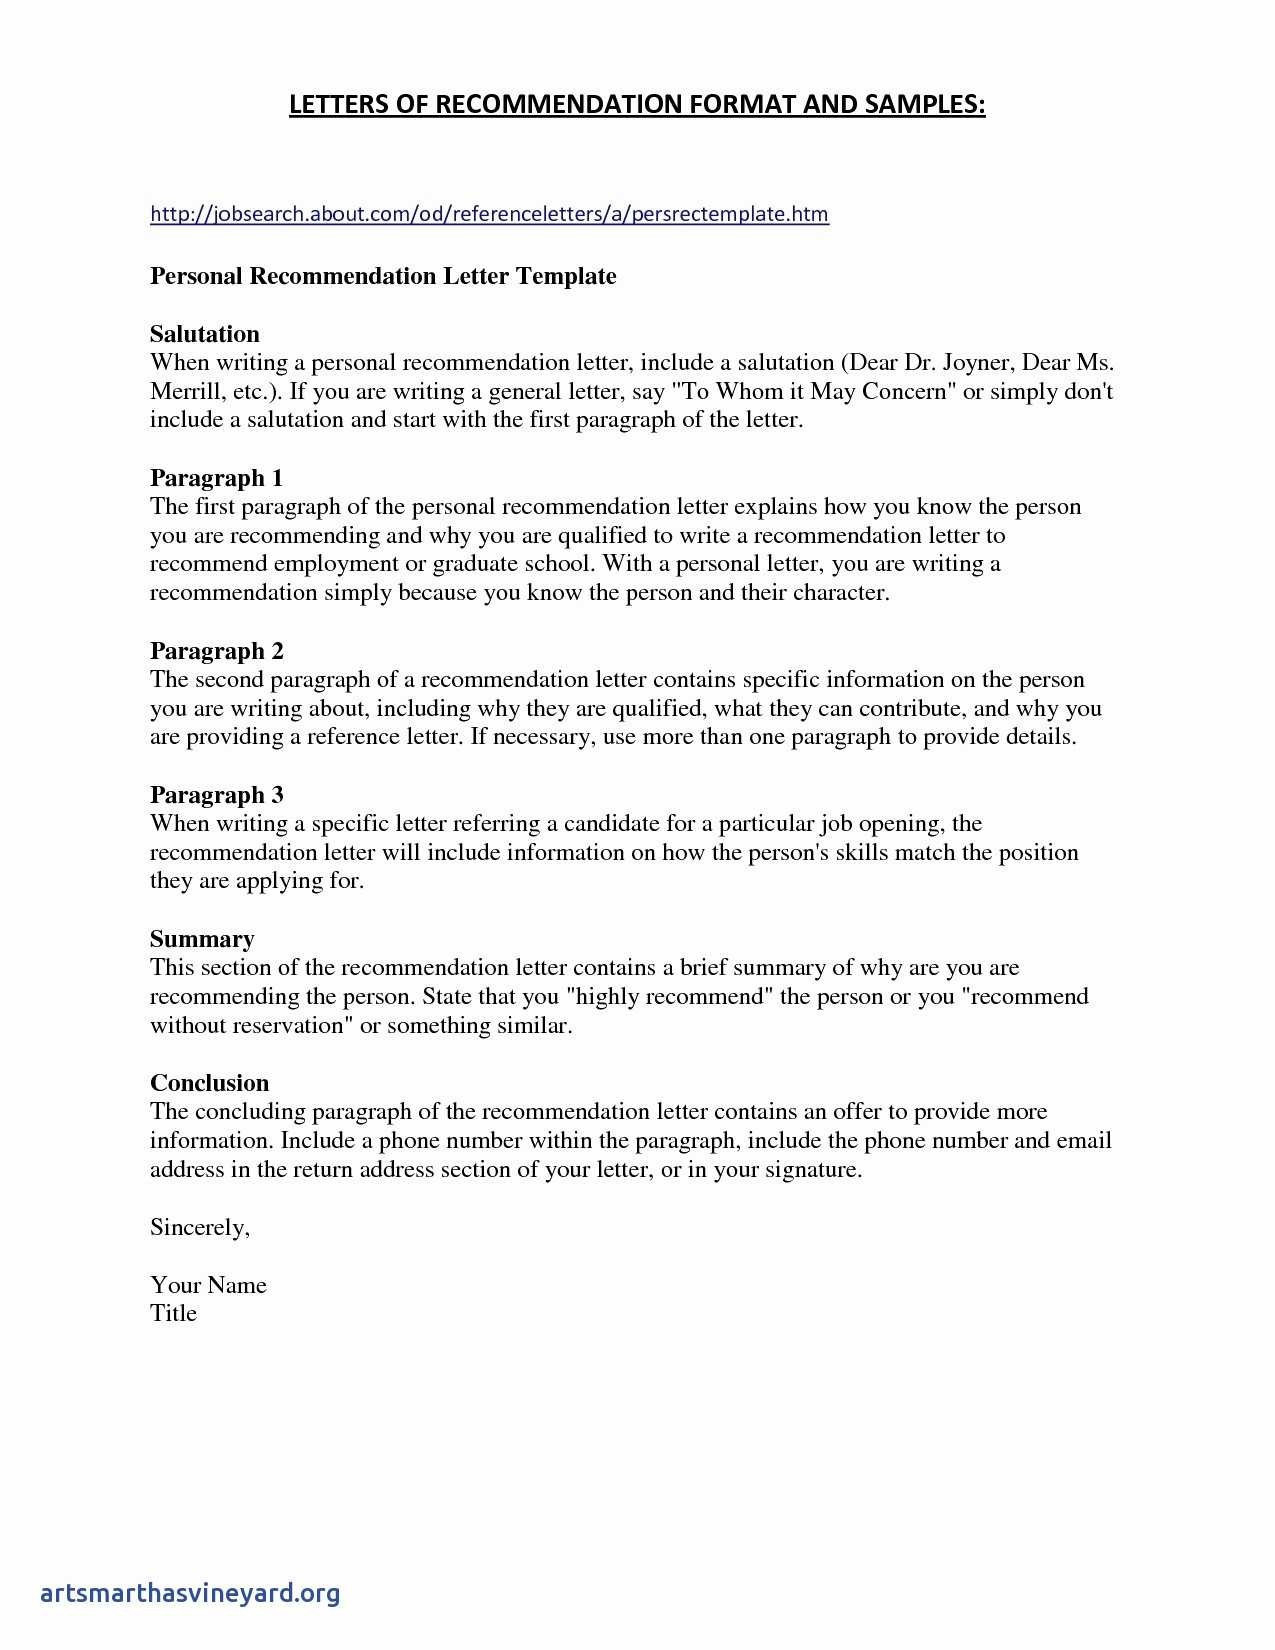 Cover Letter Examples Psu Debandje with dimensions 1275 X 1650